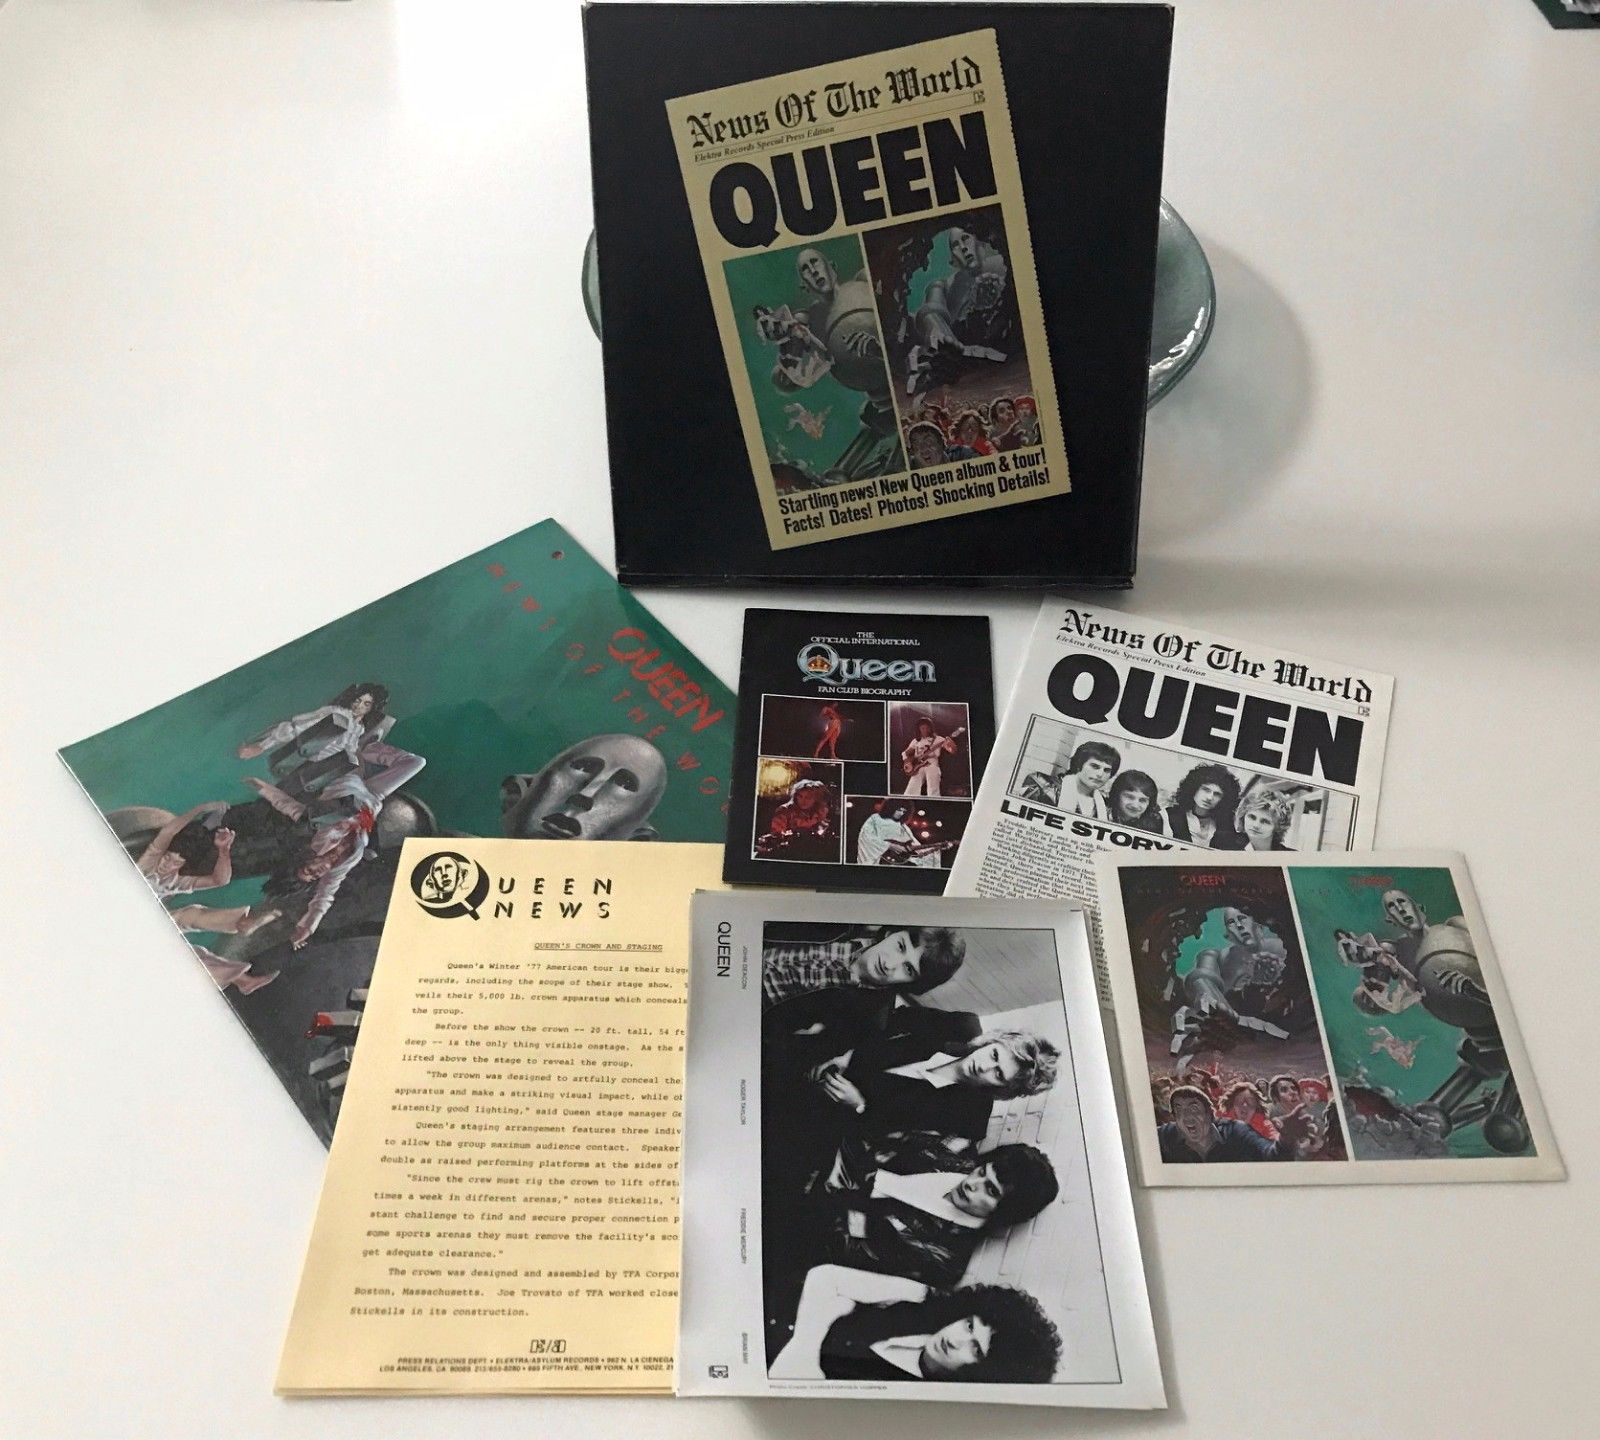 popsike.com - Queen News Of The World Press Kit w/LP, Pics, Stickers, Bios  1977 - - auction details